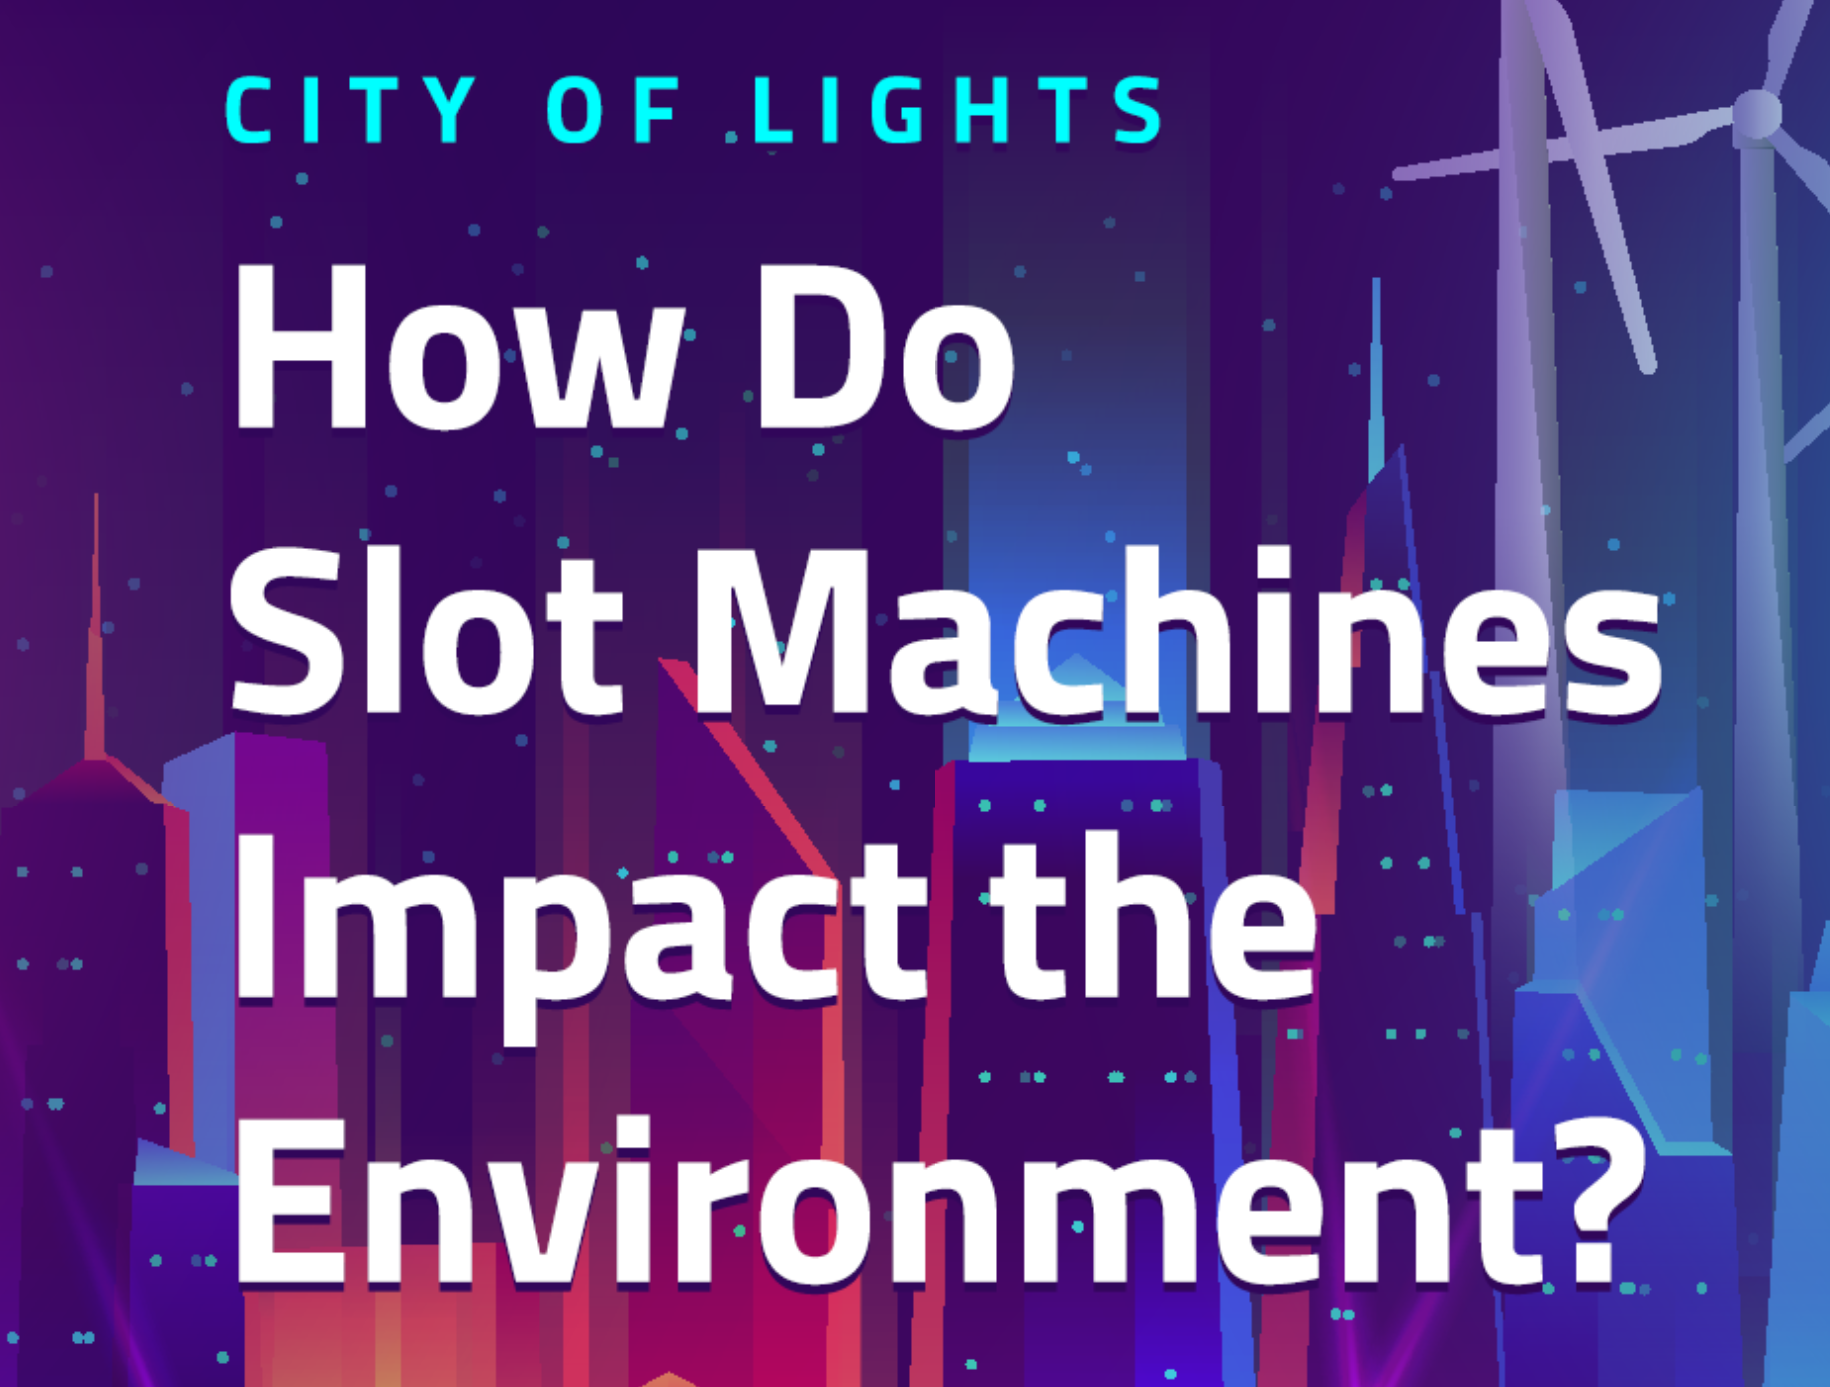 City of Lights: How Do Slot Machines Impact the Environment?